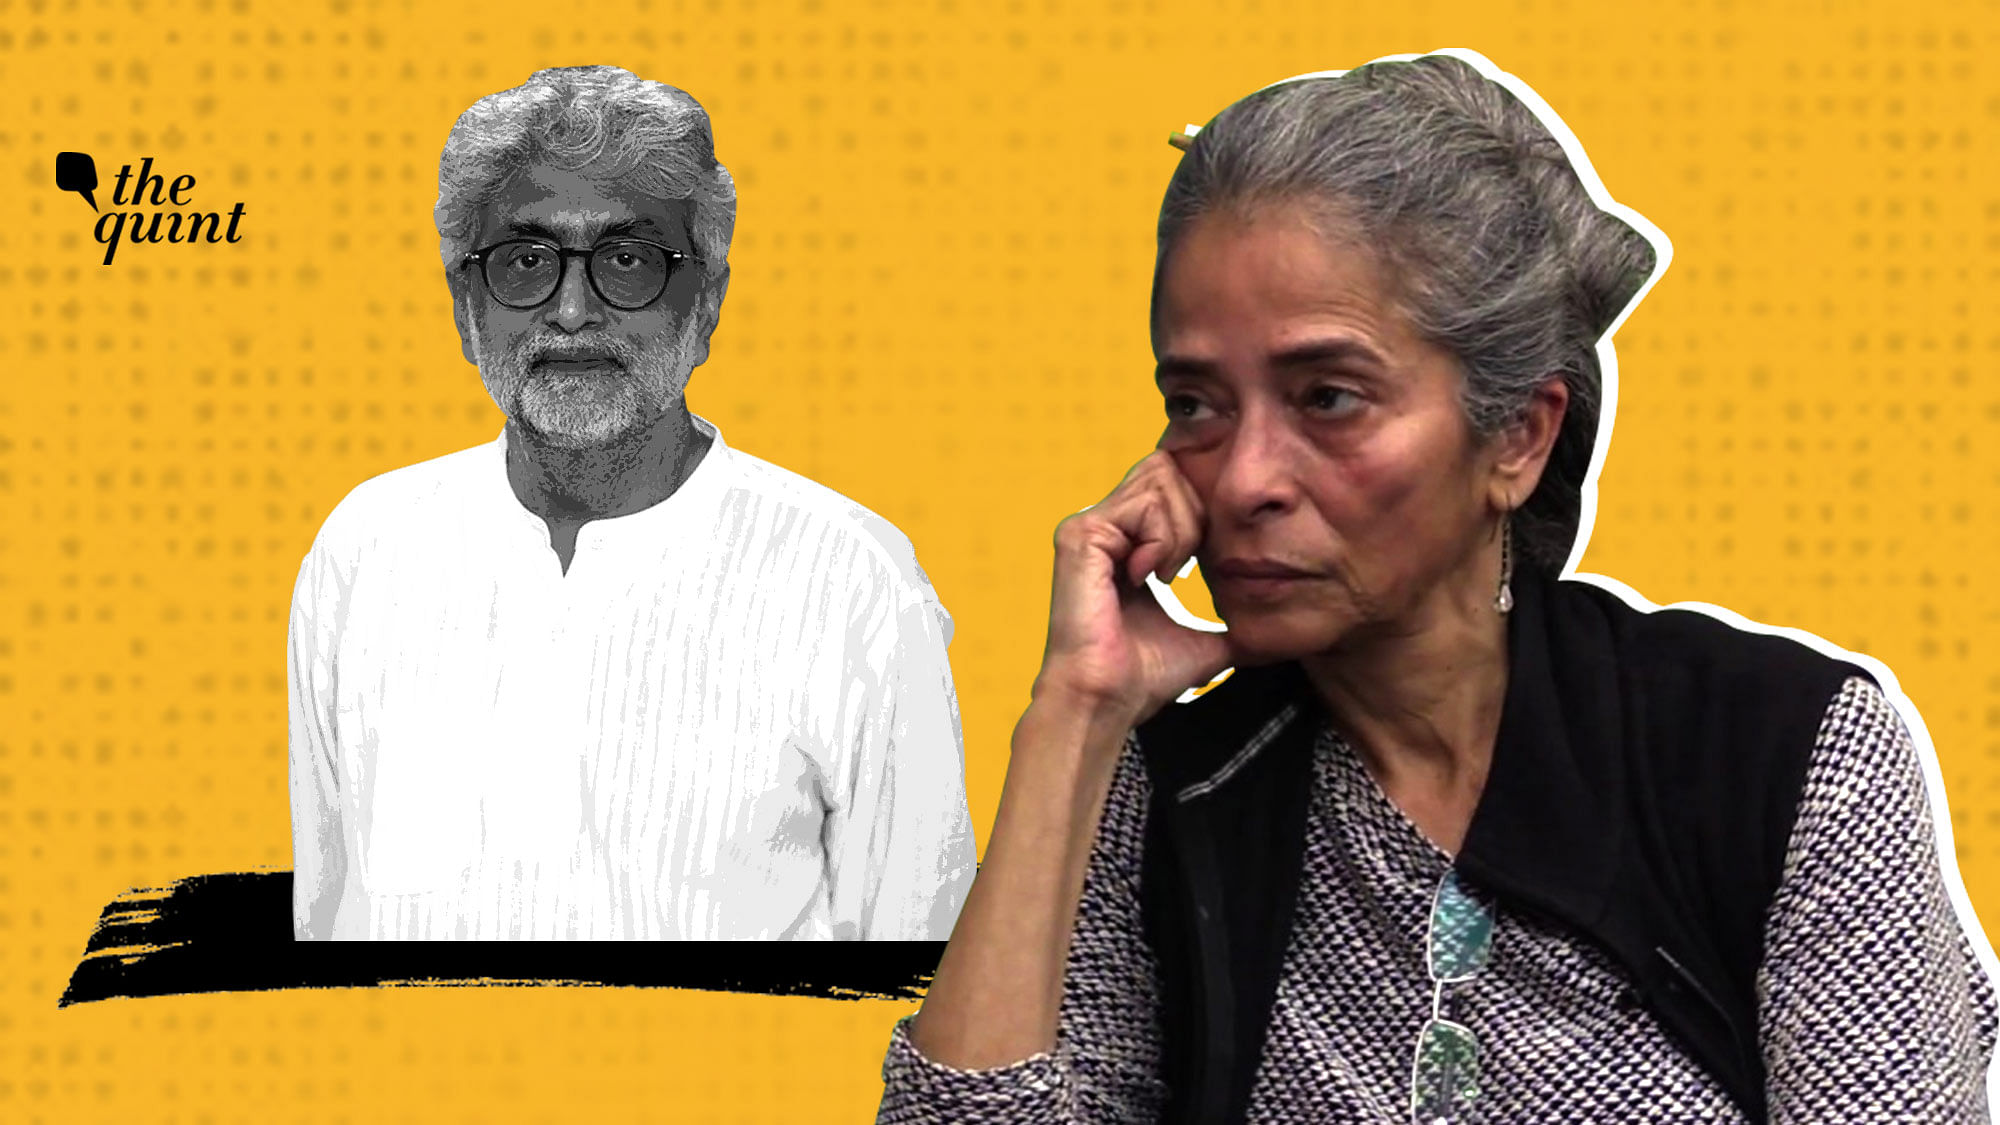 “I lose my sleep when this happened actually. It’s already been ten days since he is without it,” Navlakha’s partner Sahba Husain told <b>The Quint</b>.